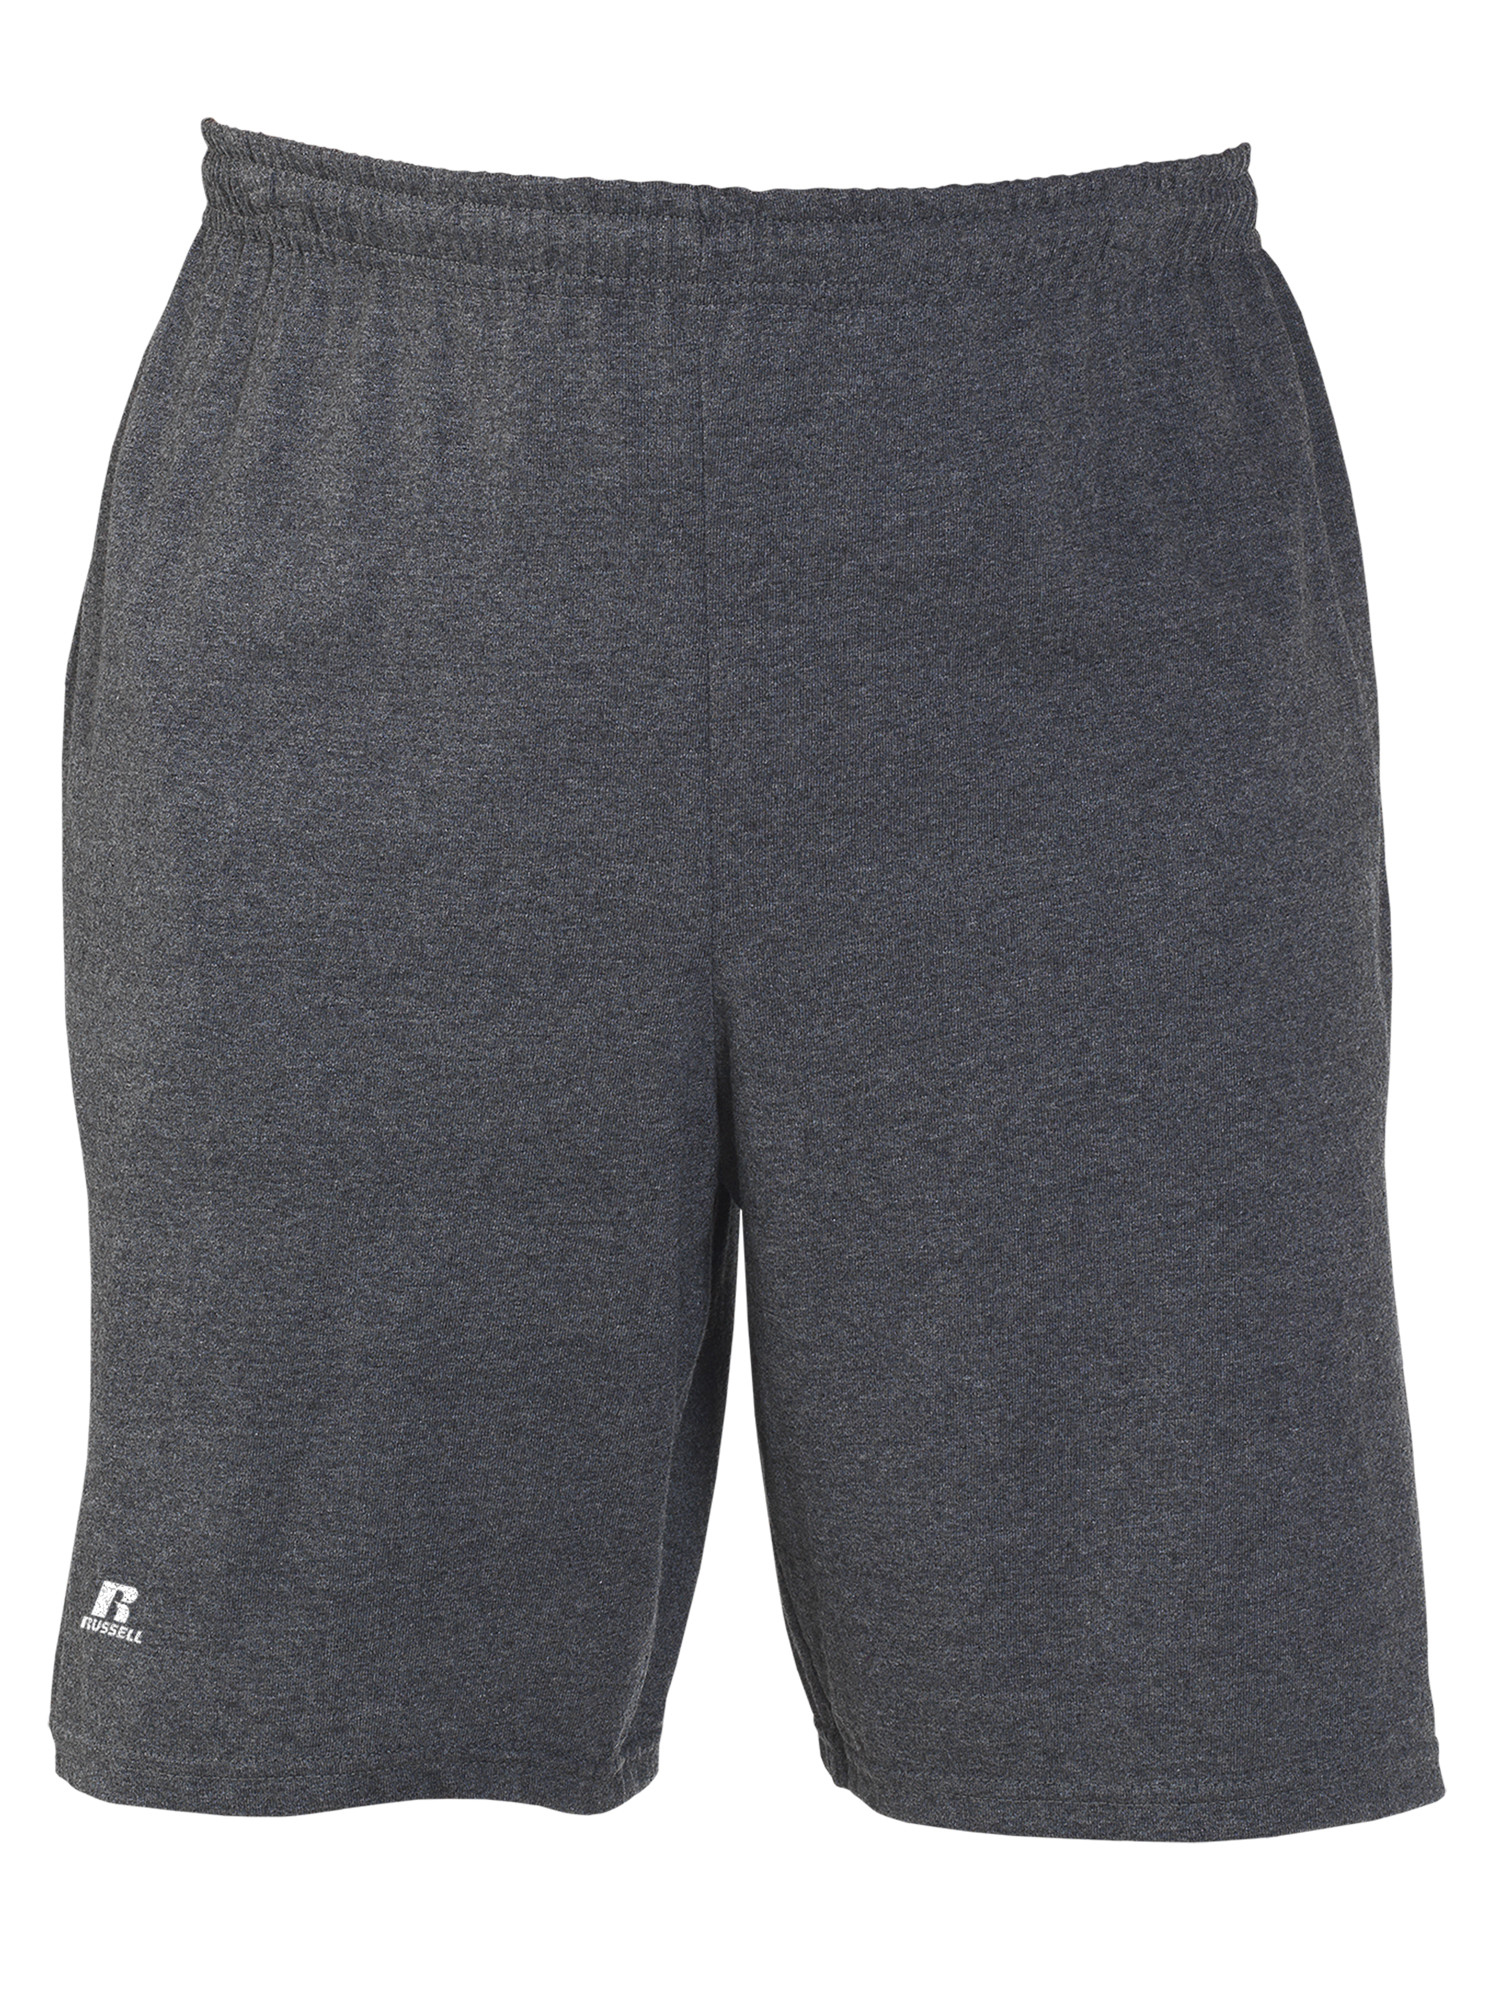 Russell Athletic Men's and Big Men's Basic Cotton Pocket Shorts - image 4 of 5